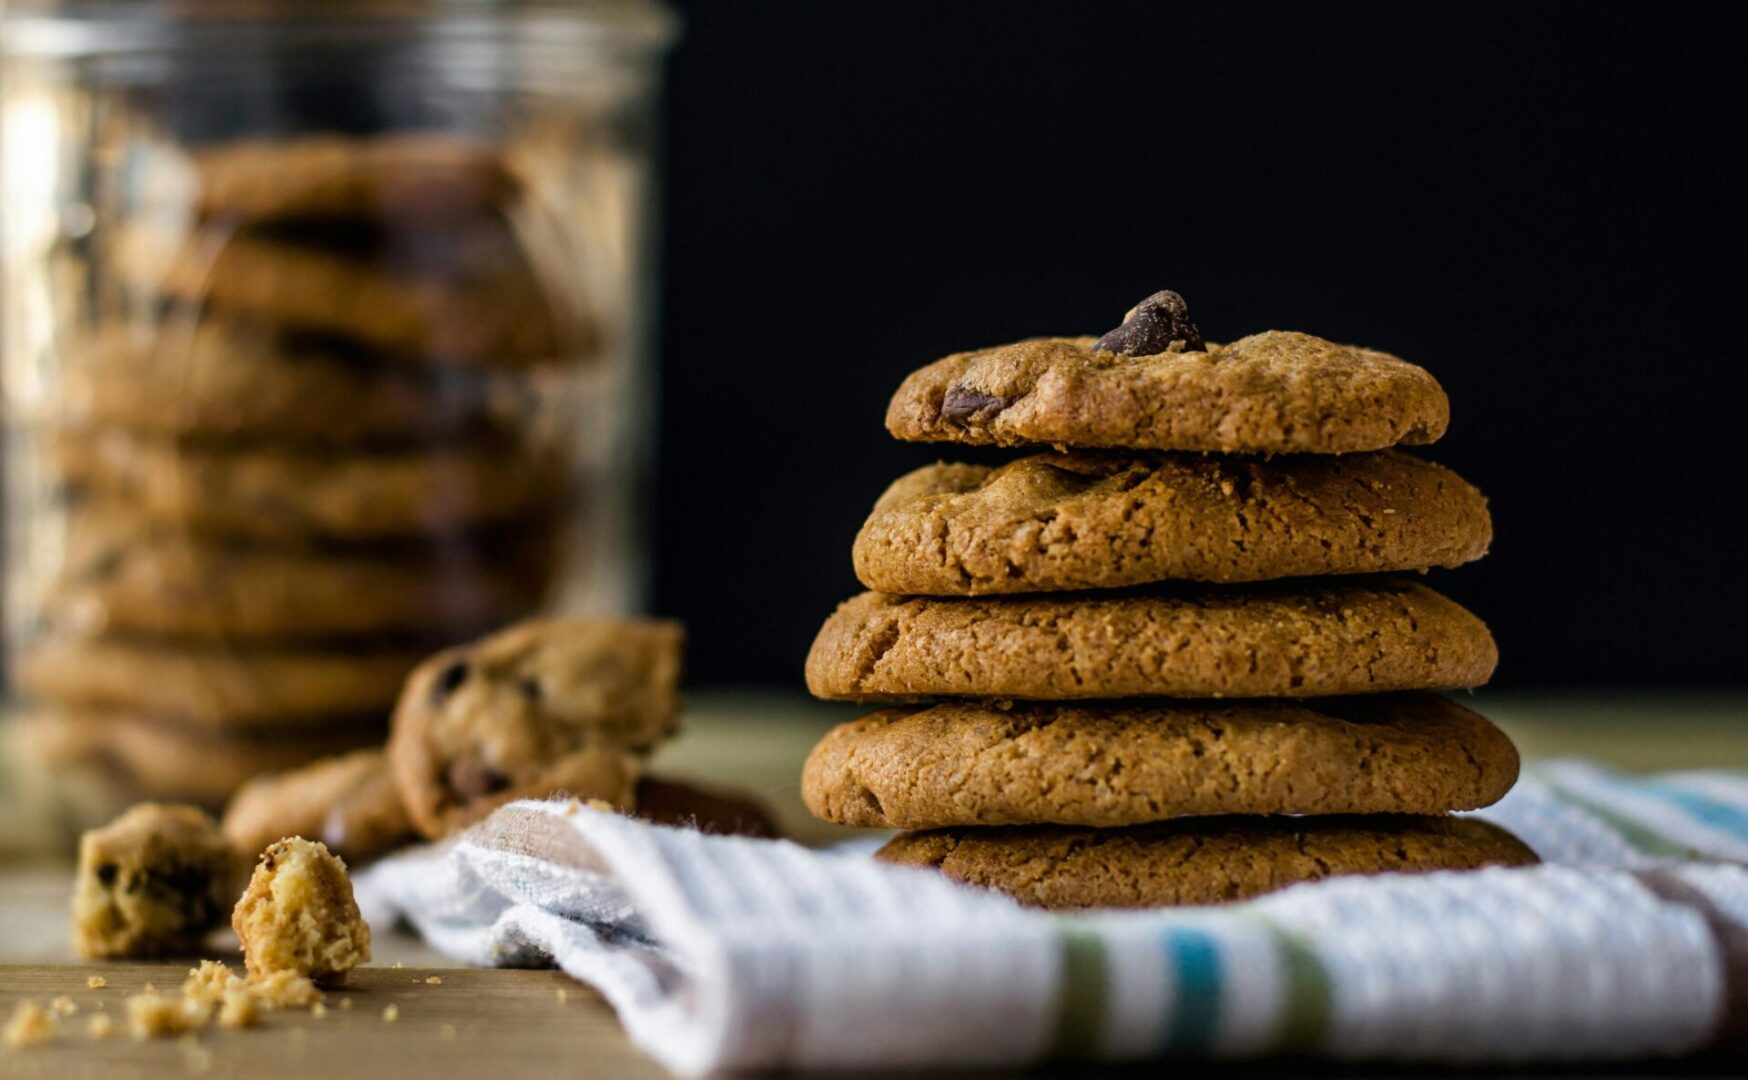 Taking The Biscuit: Online Advertising In A World Without Cookies